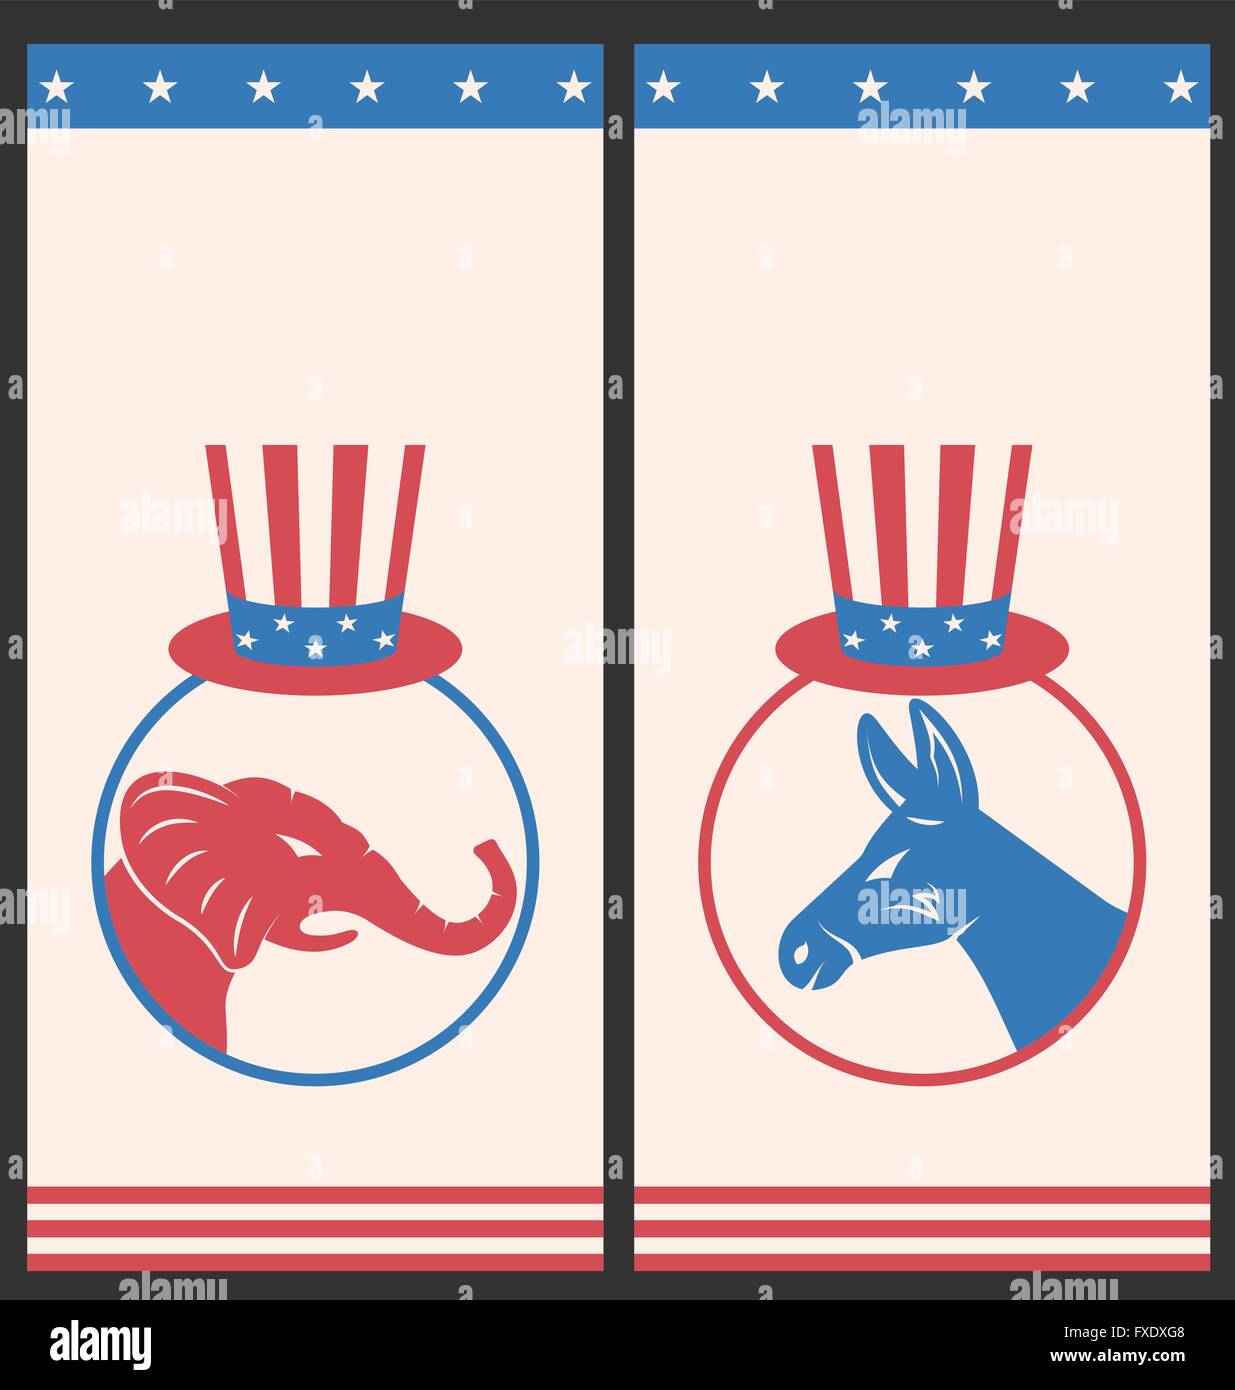 Banners for Advertise of United States Political Parties Stock Vector